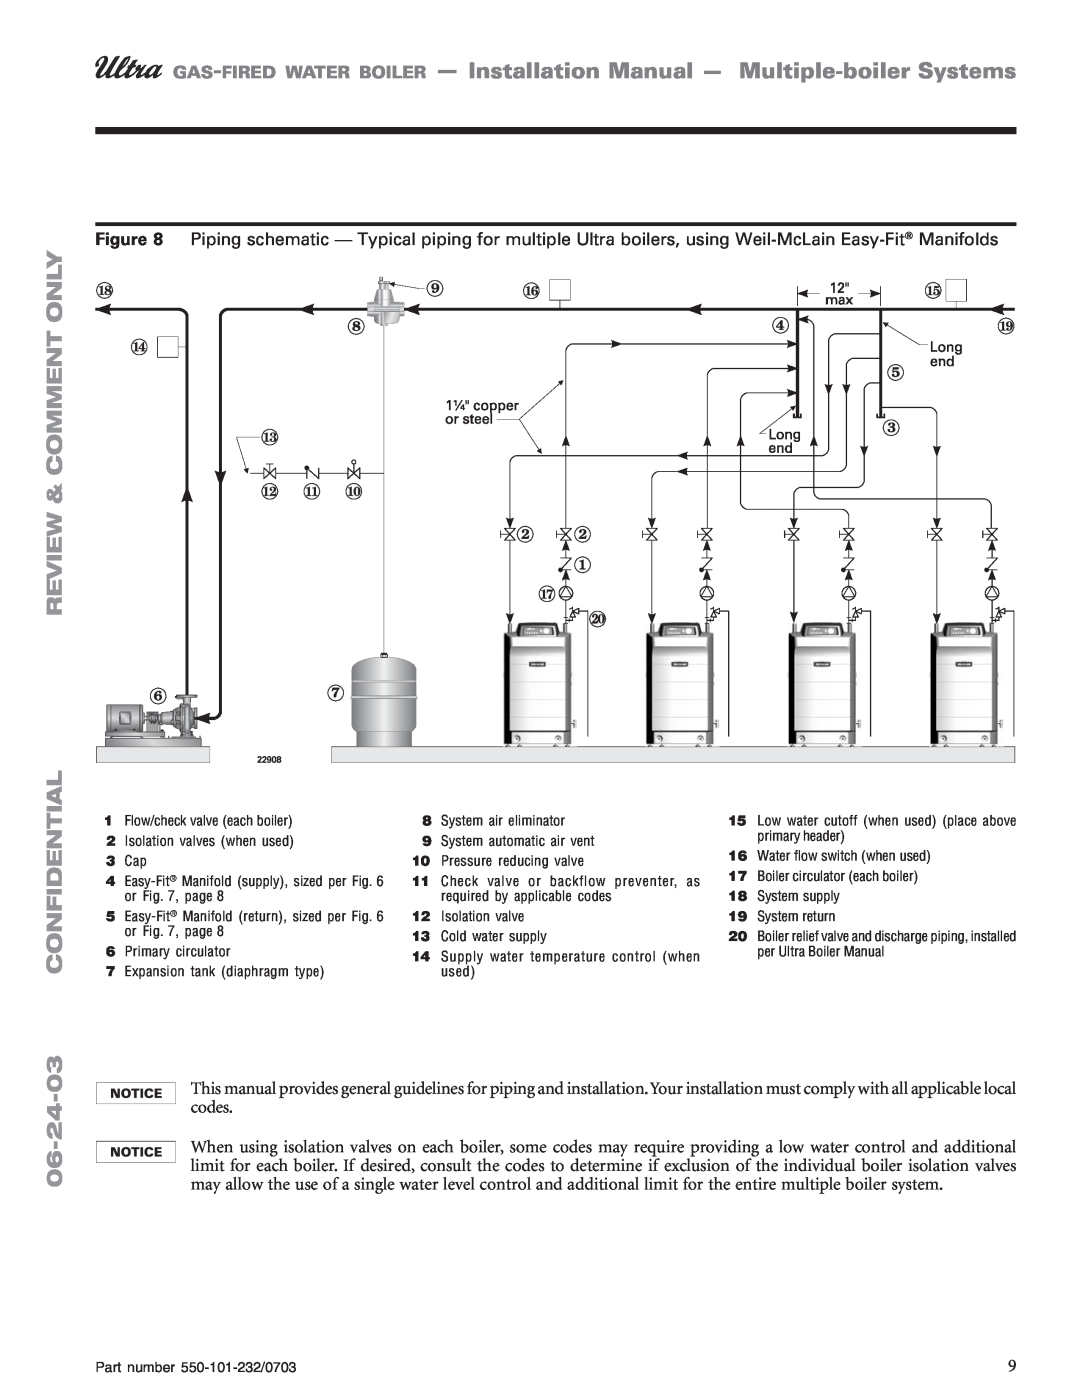 Weil-McLain Boiler installation manual Review & Comment Only, Confidential, 06-24-03 